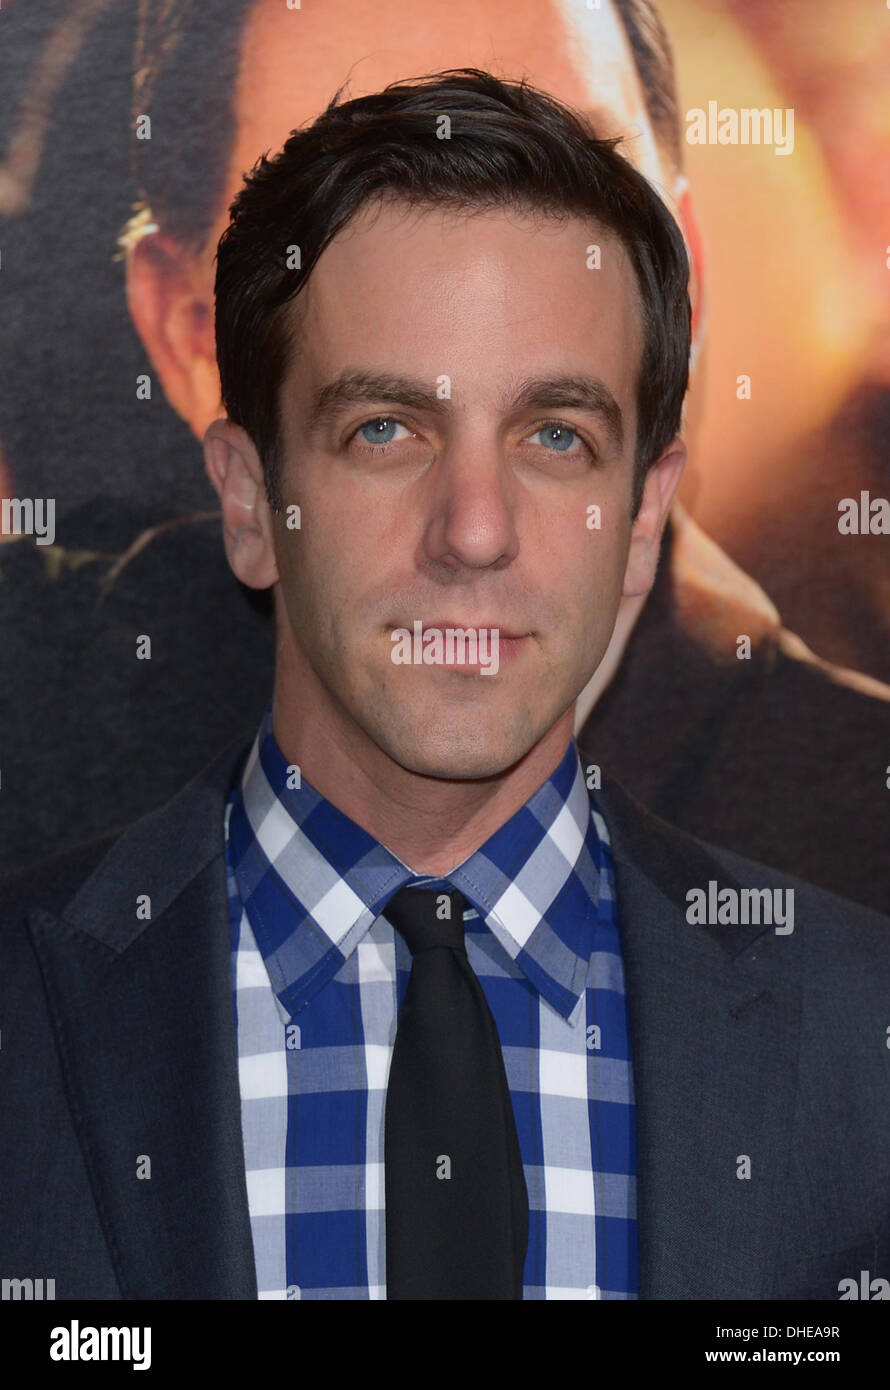 Los Angeles, USA. 7th November 2013. BJ Novak at the film premiere for Saving Mr Banks at the TCL Chinese Theatre in Hollywood, CA Credit:  Sydney Alford/Alamy Live News Stock Photo